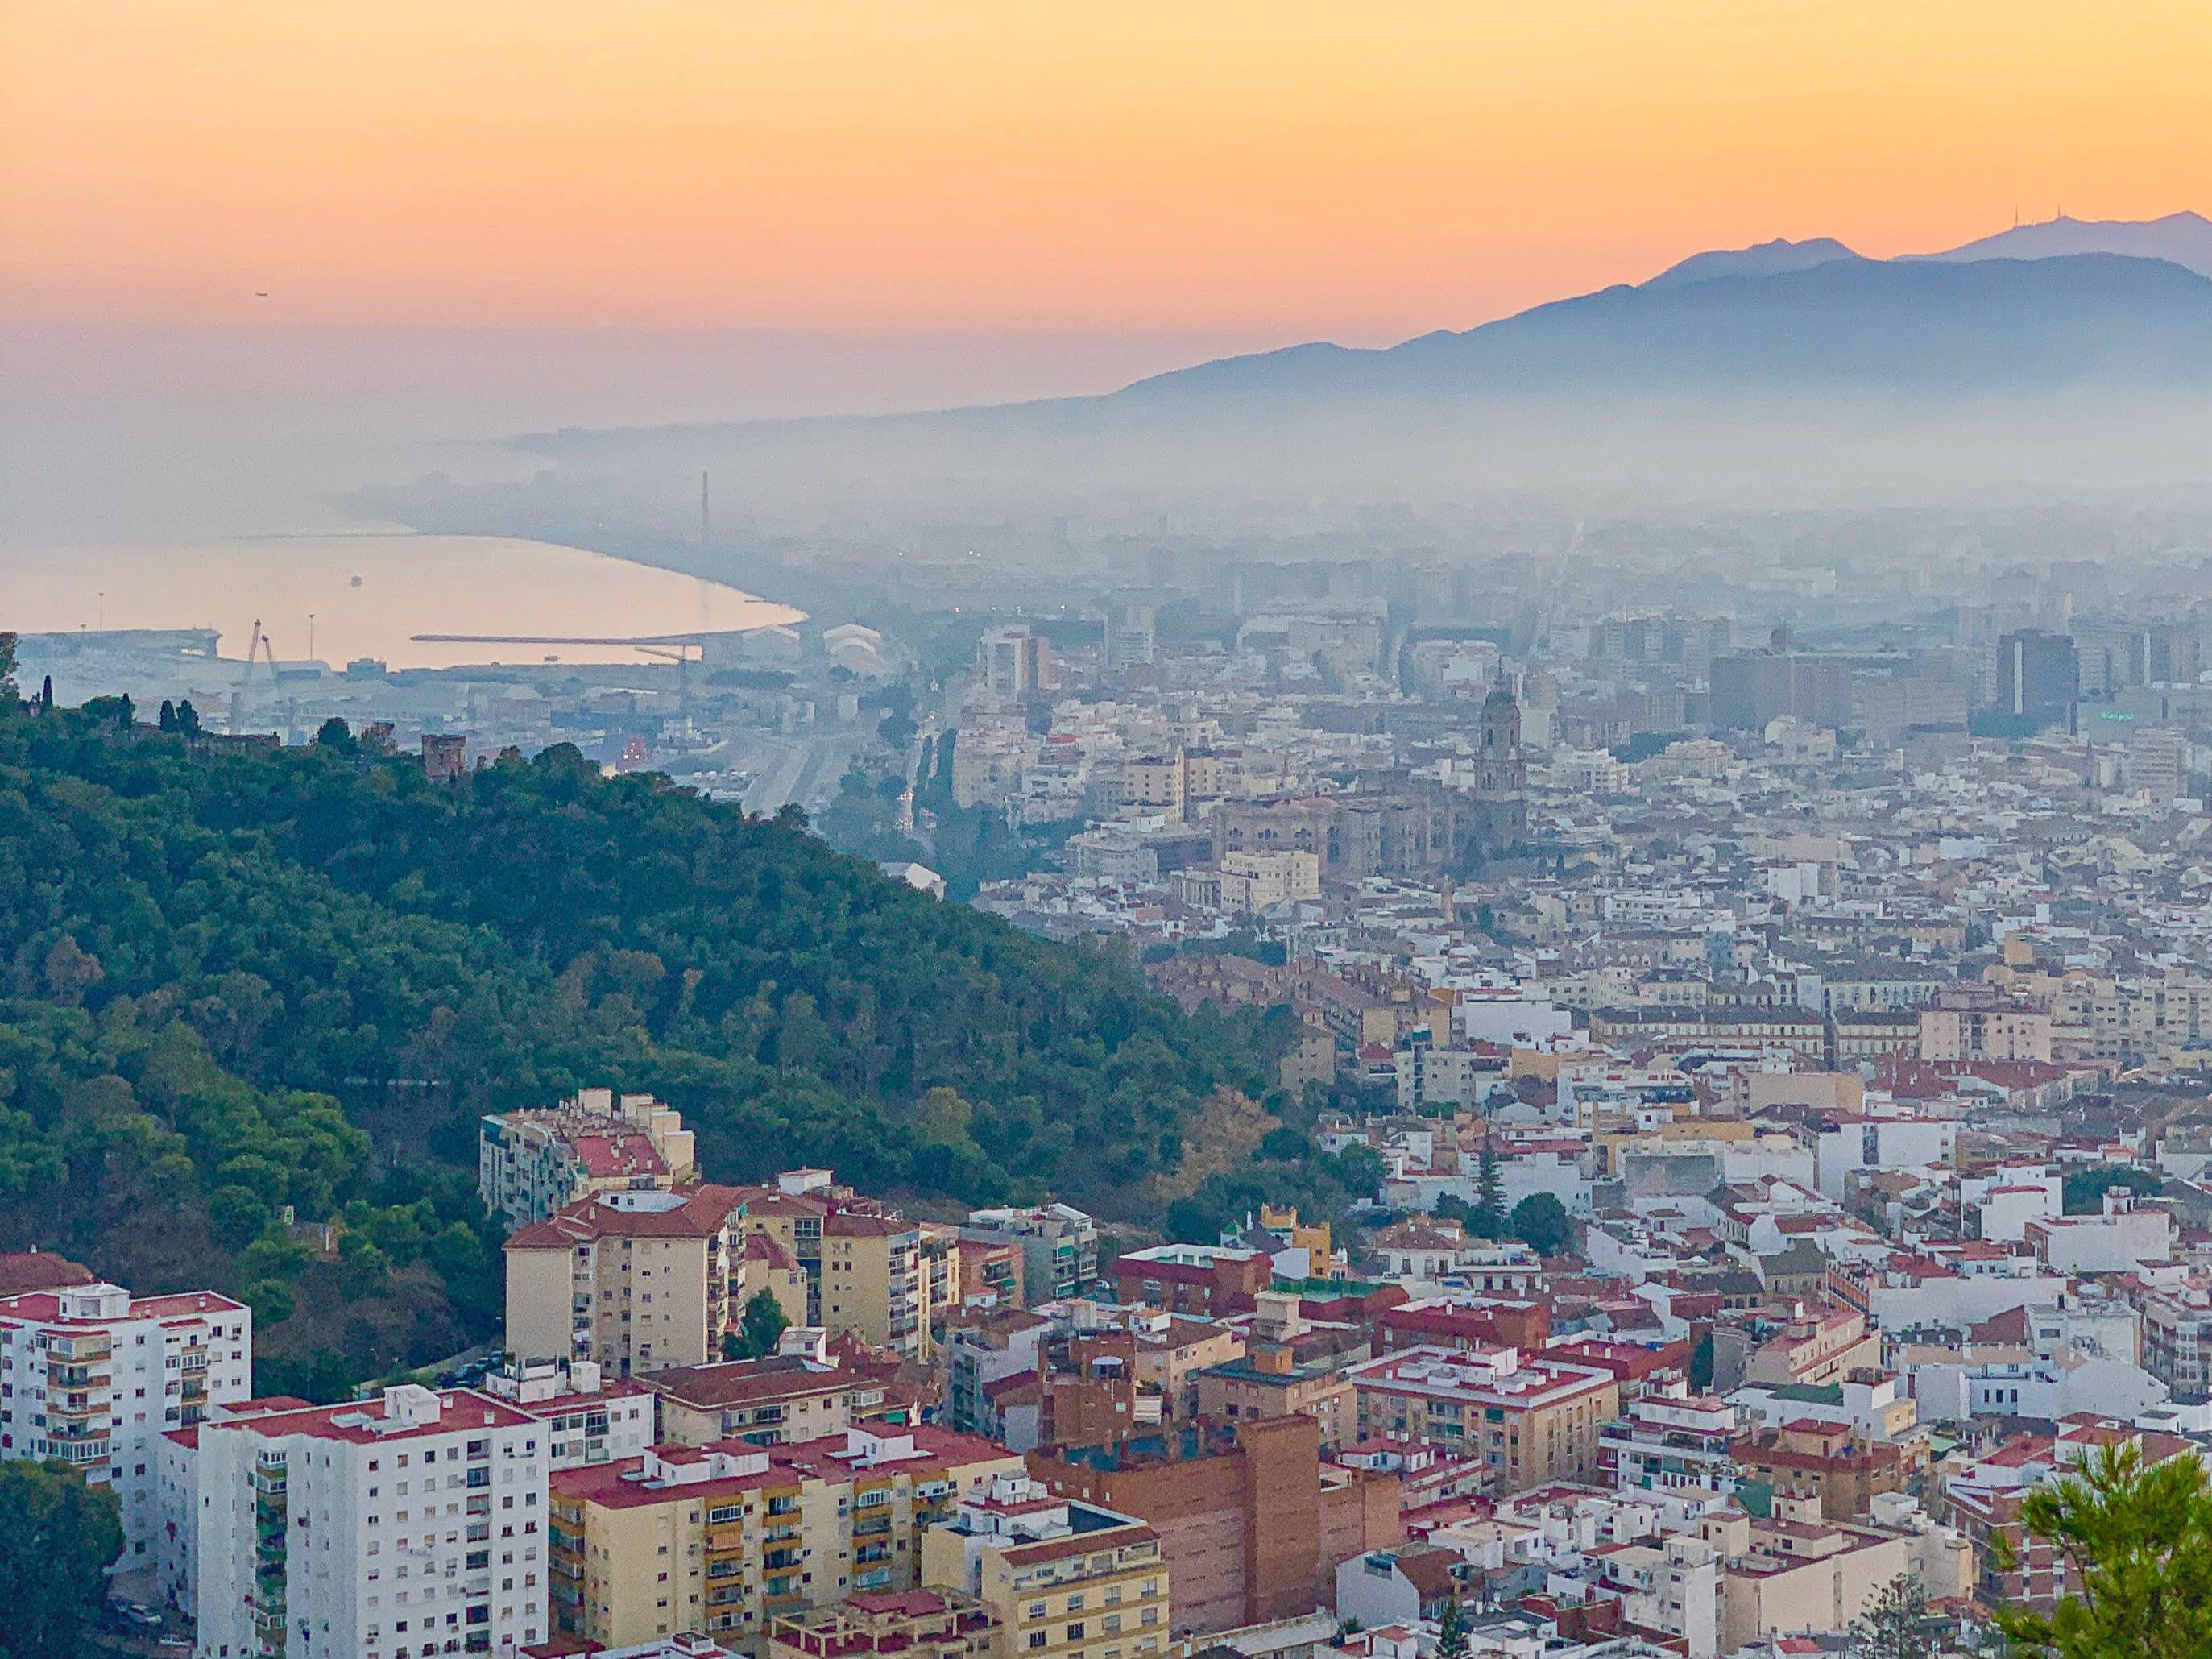 14 fun facts about Málaga you might not know